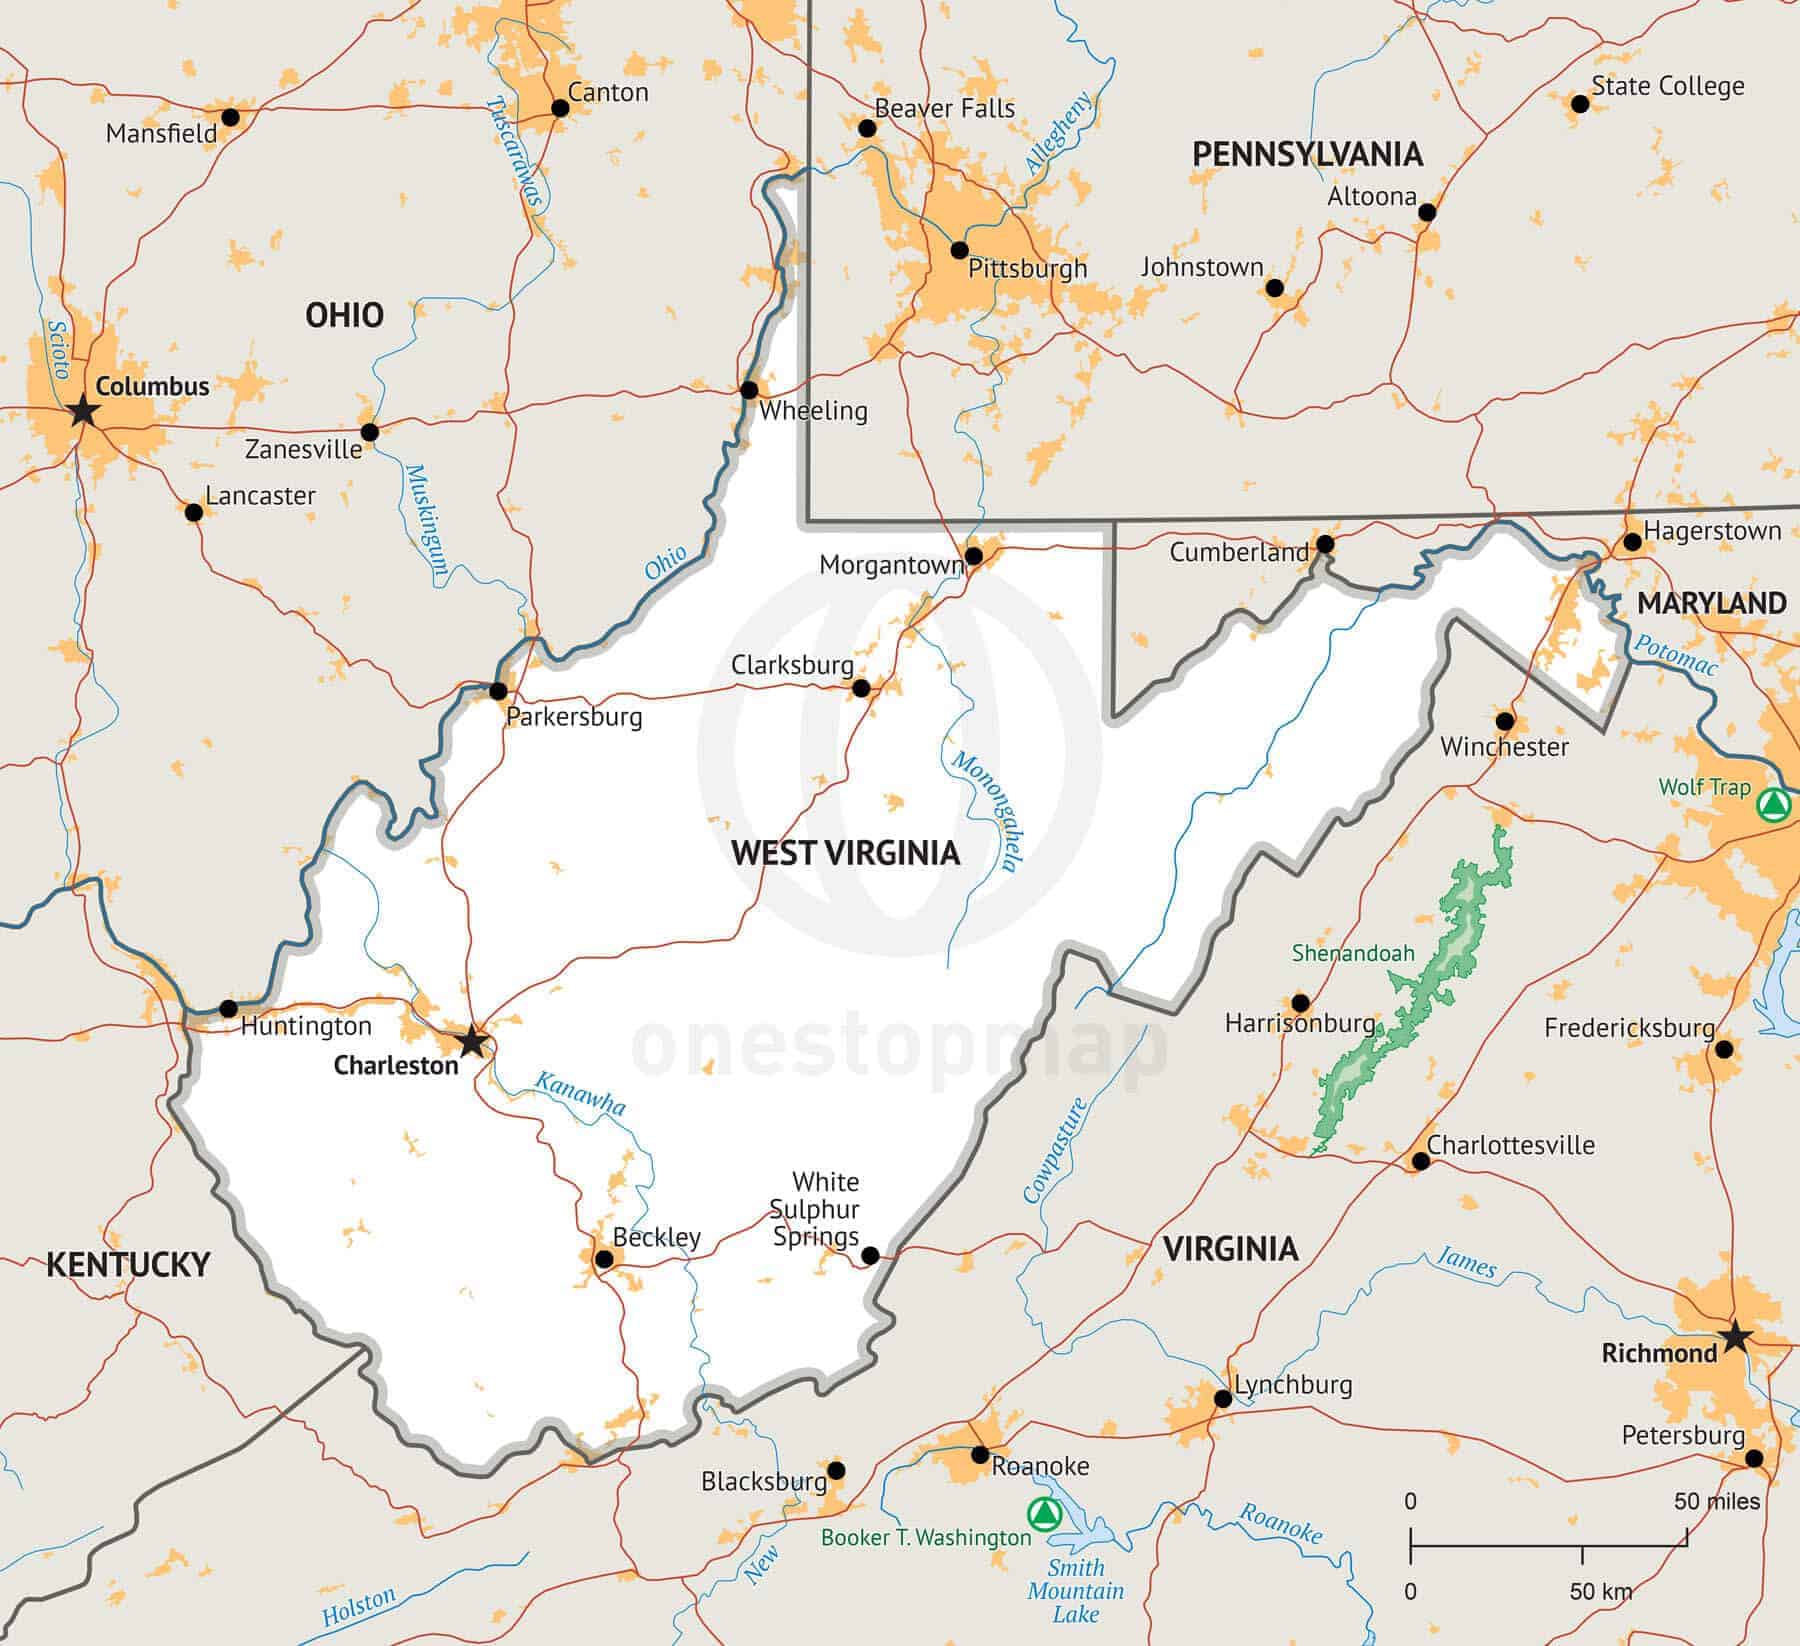 WEST VIRGINIA OFFICIAL STATE HIGHWAY MAP 2018 EDITION 